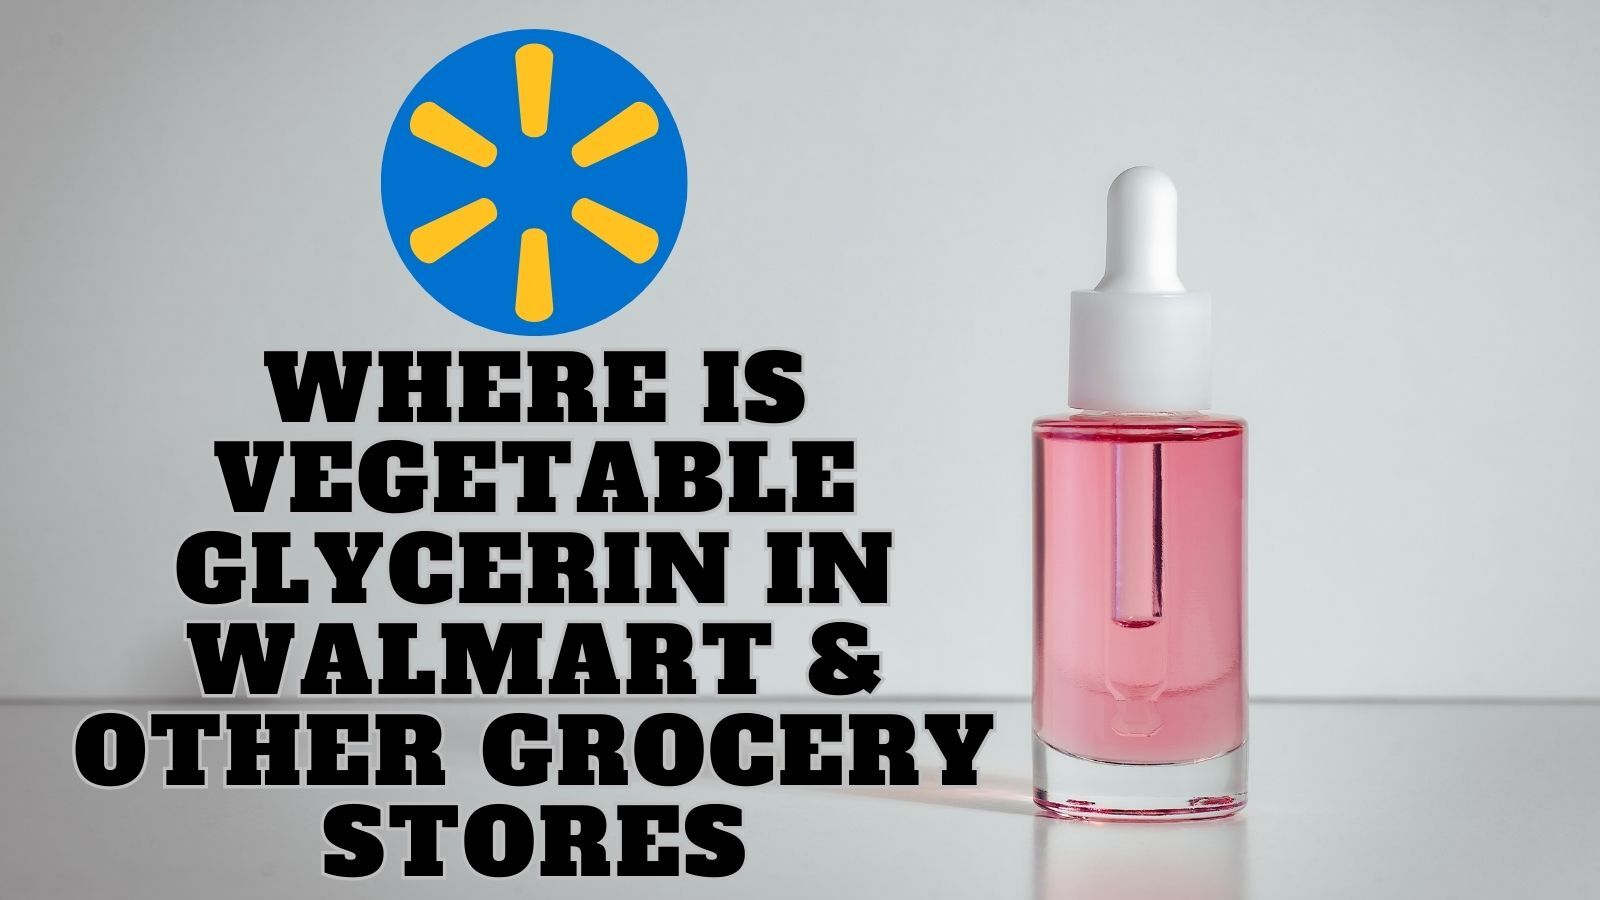 Where is Vegetable Glycerin in Walmart & Other Grocery Stores